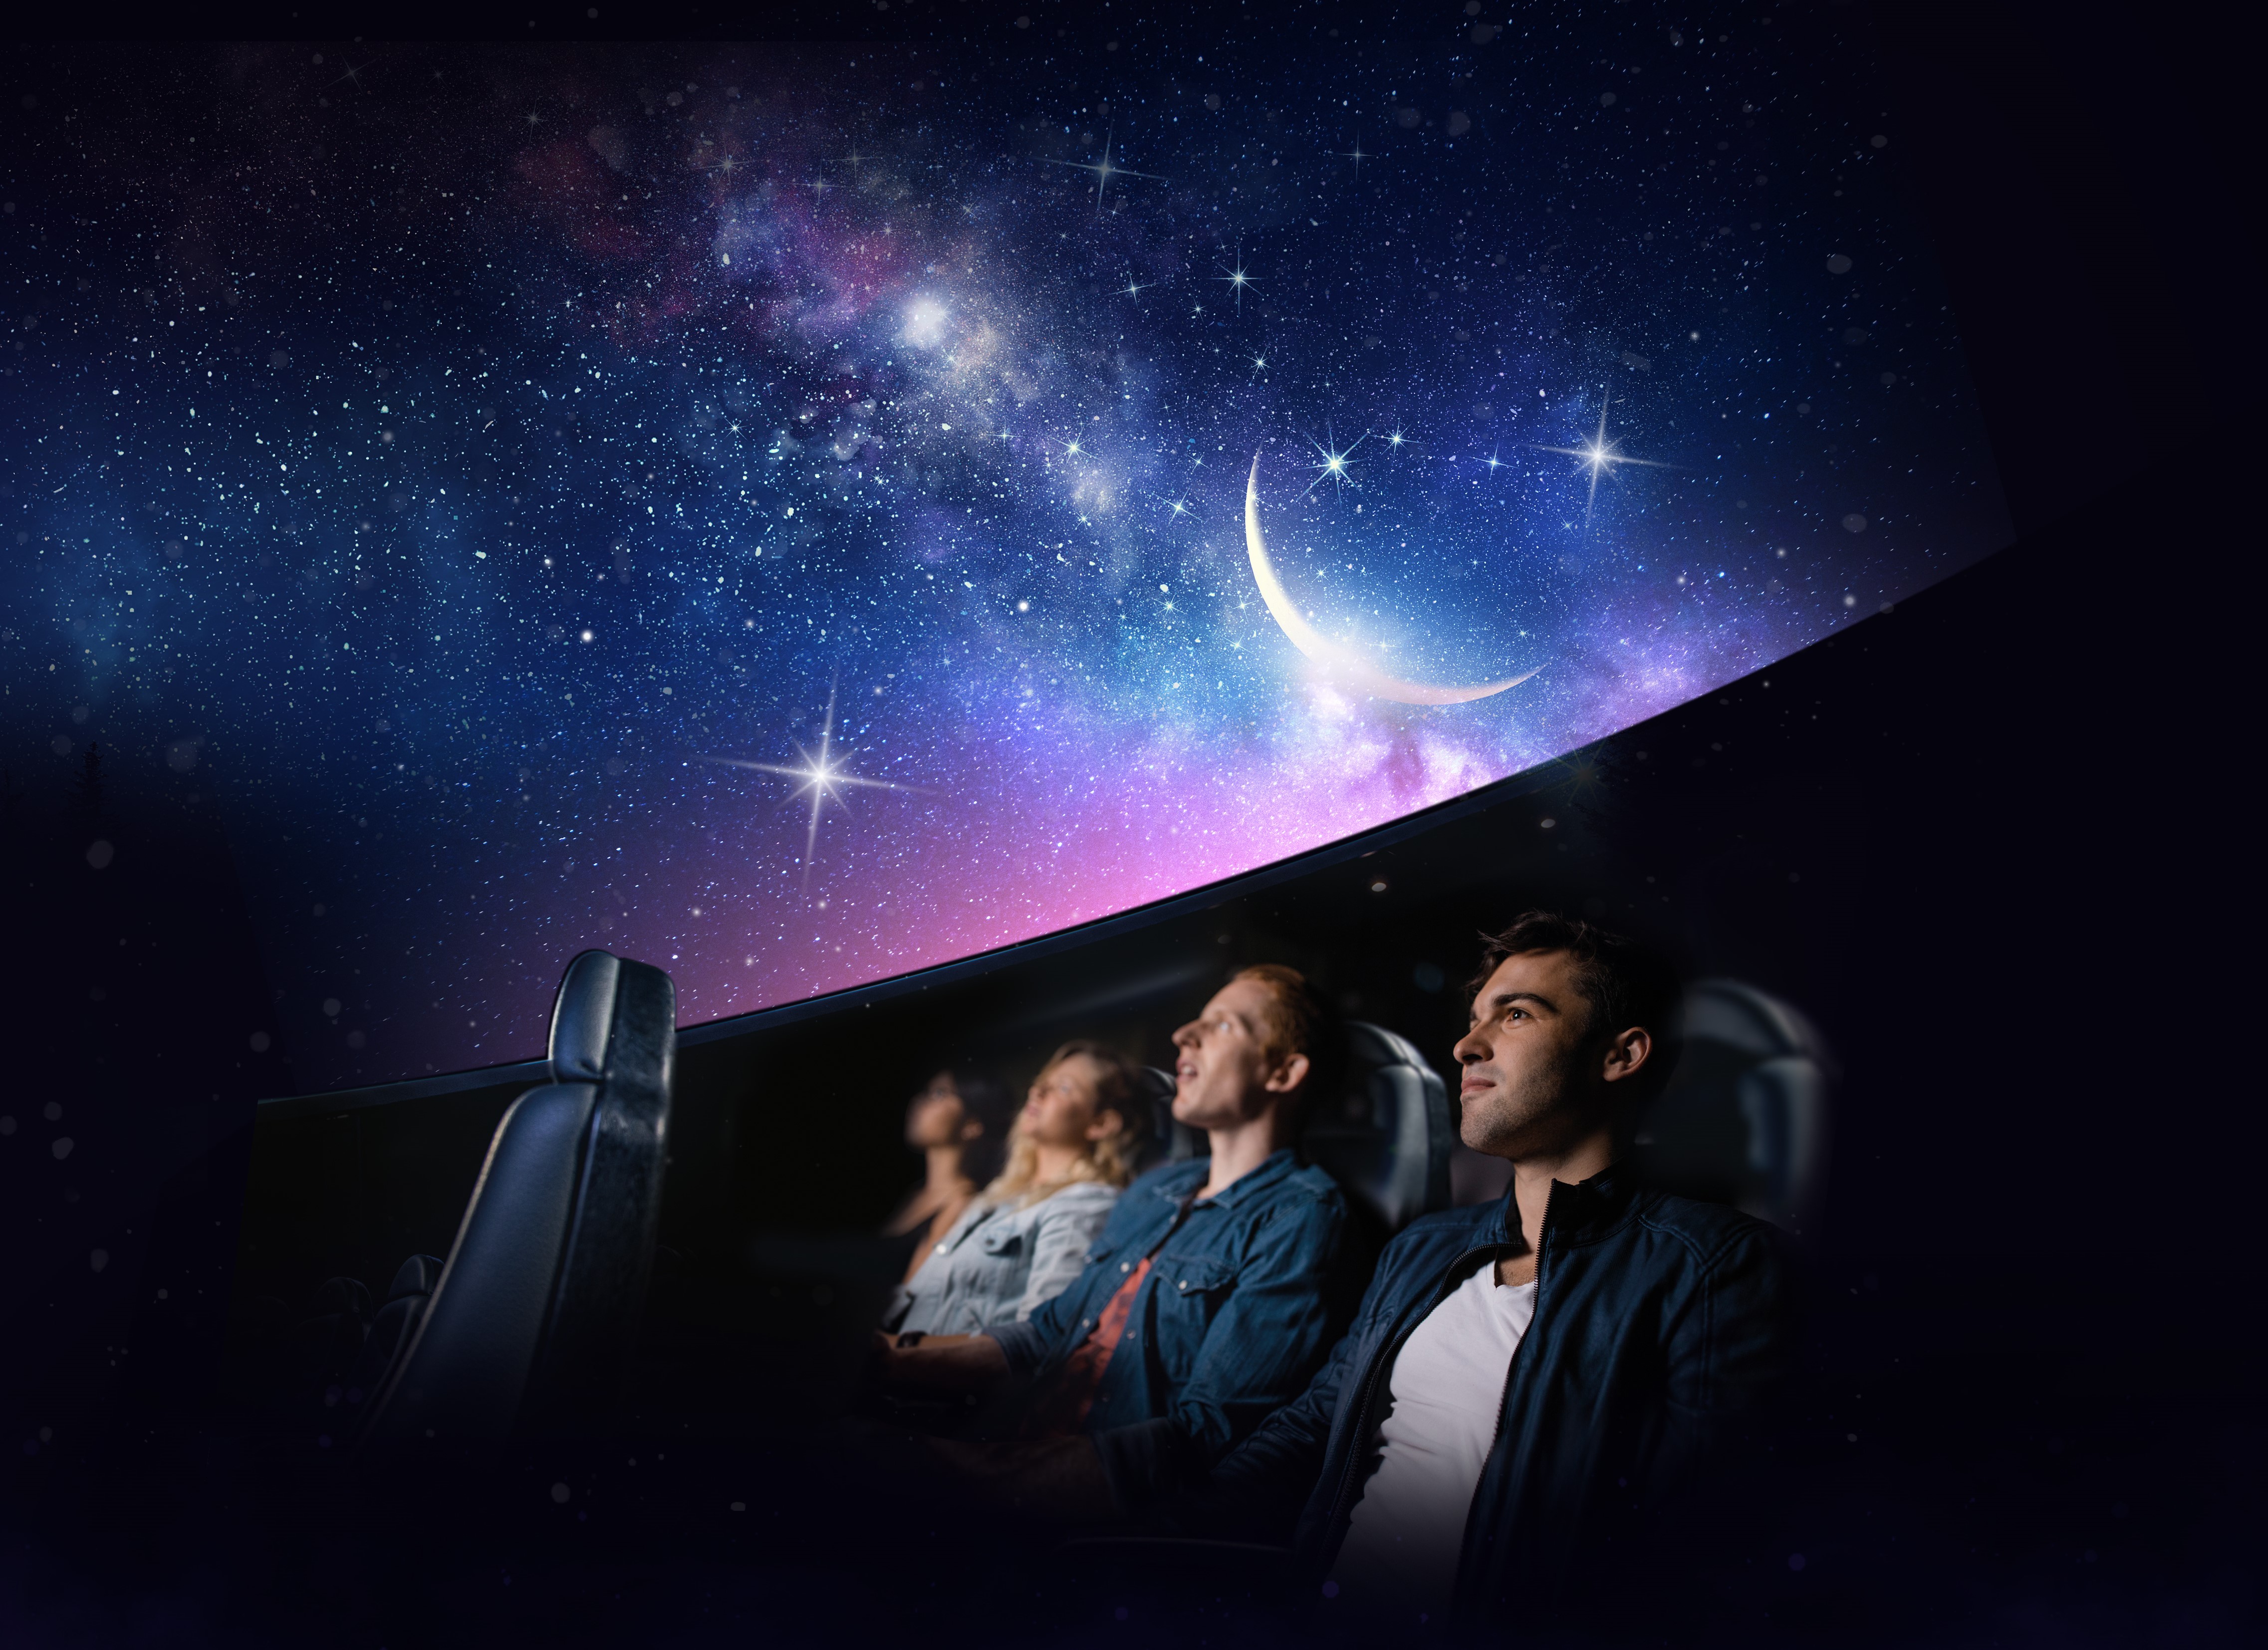 Three people sat in a row looking up to a night sky/space at a planetarium